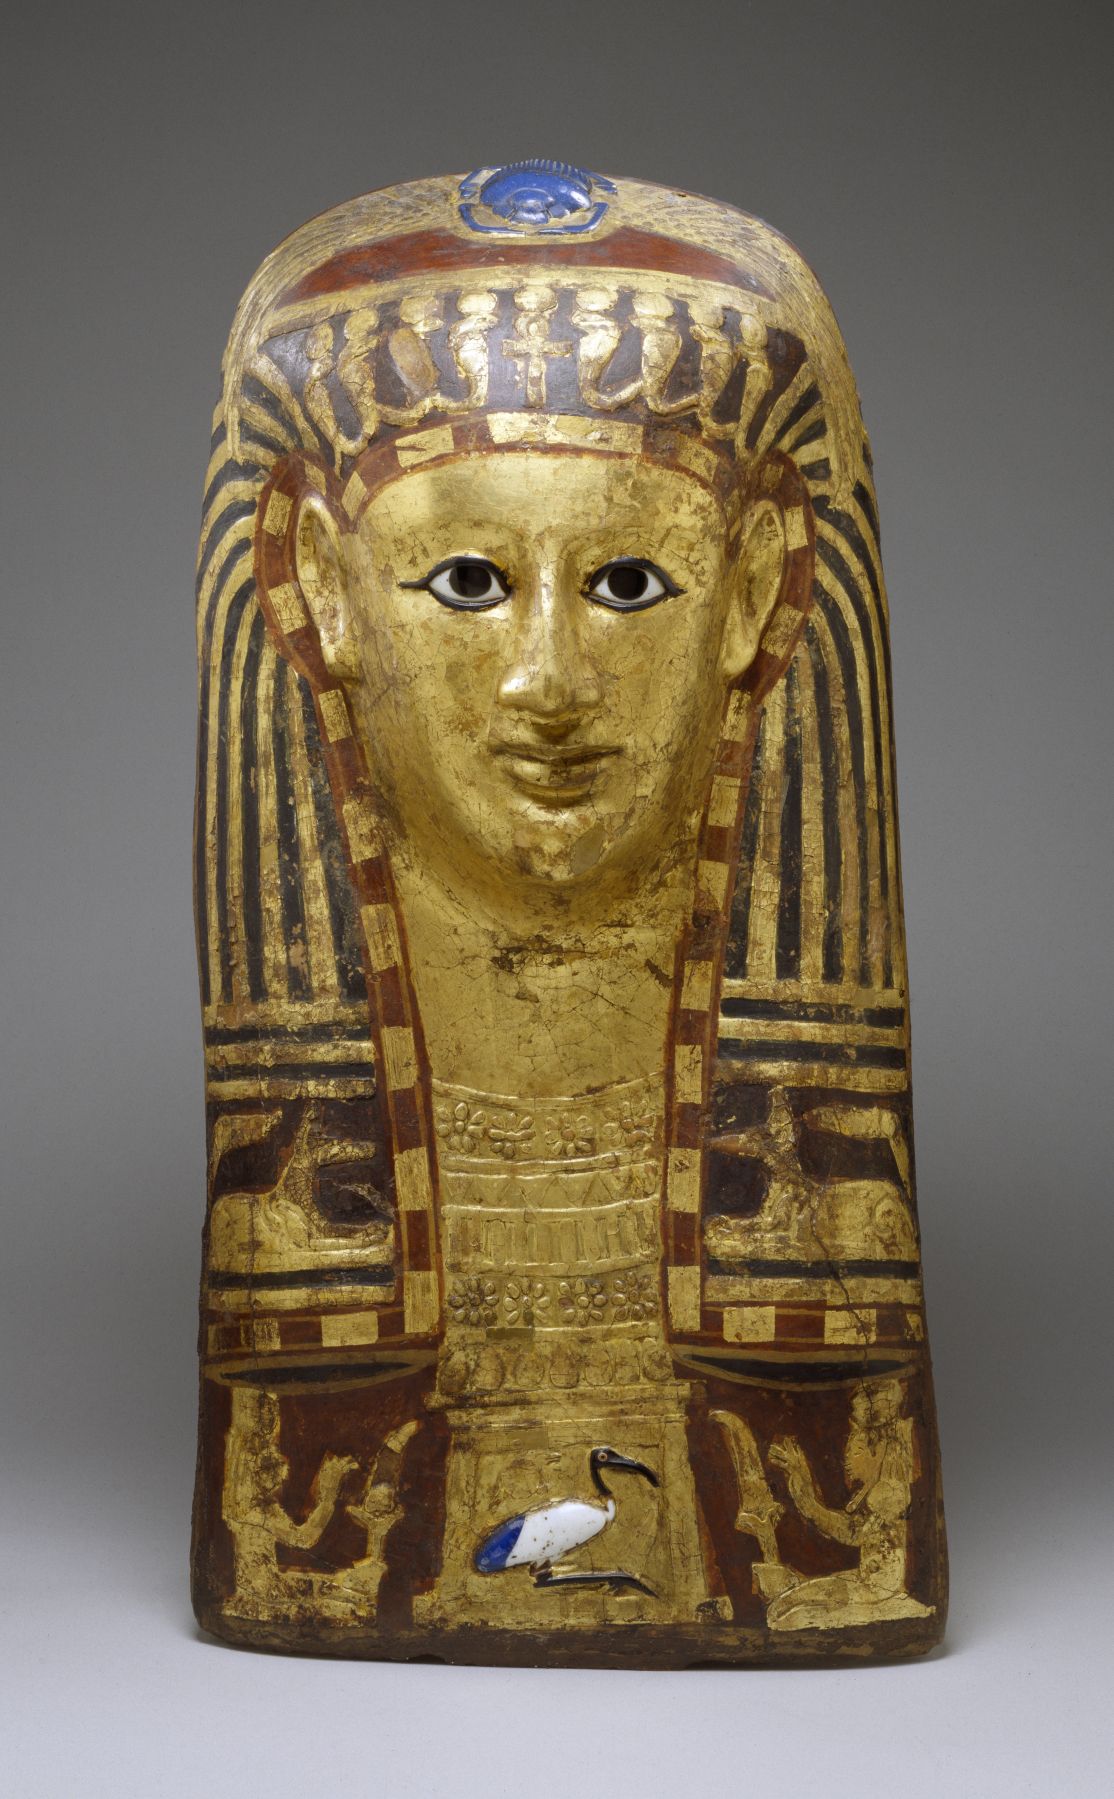 An Egyptian funerary mask with a blue glass scarab - a symbol of renewal - on the top of the head. Cartonnage Mask of a Woman, mid 1st century BCE - mid 1st century CE. The Walters Art Museum.  